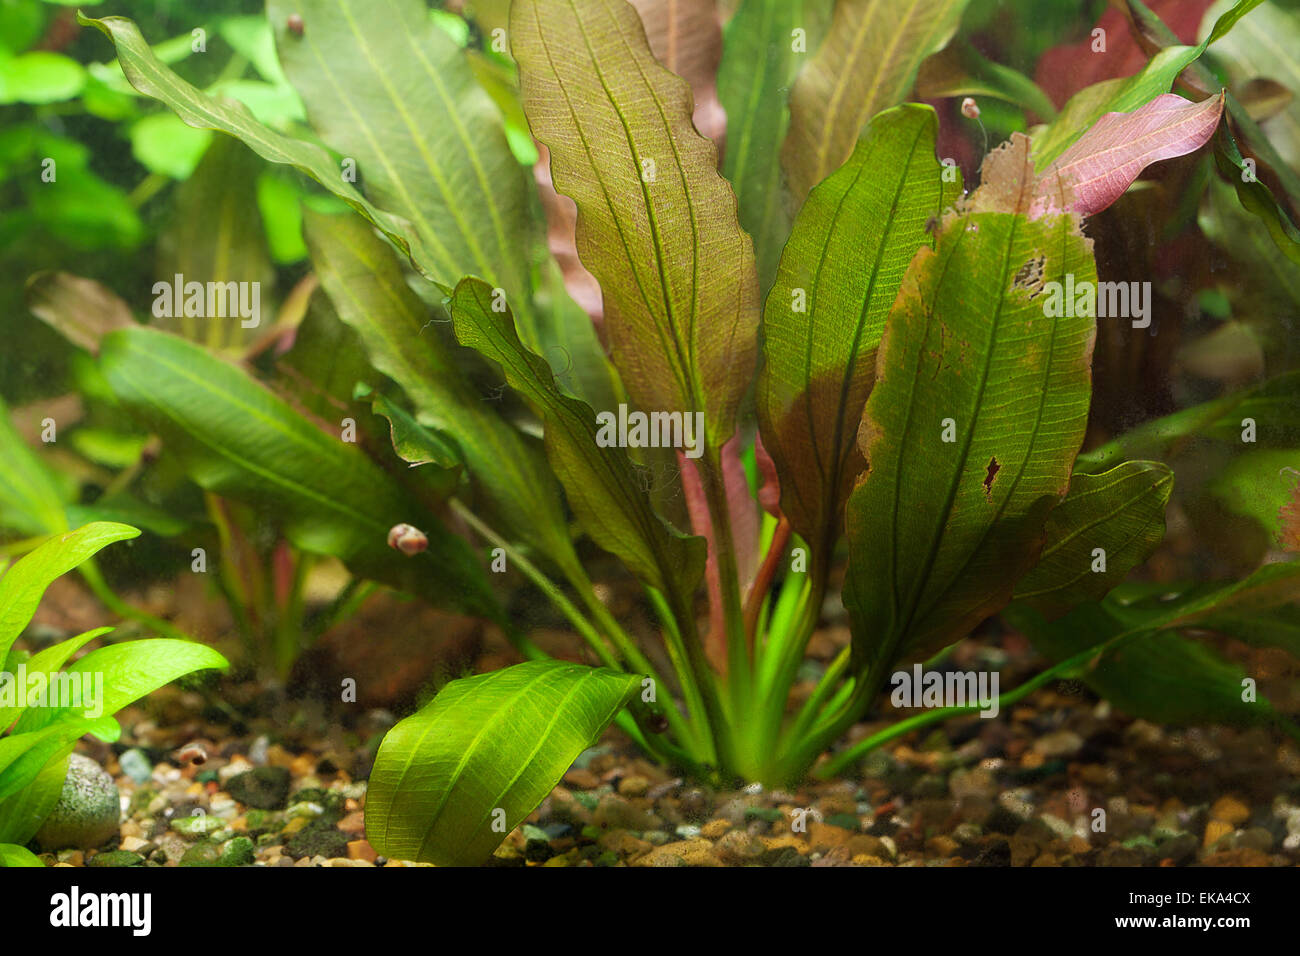 background of the aquarium with green plants Stock Photo